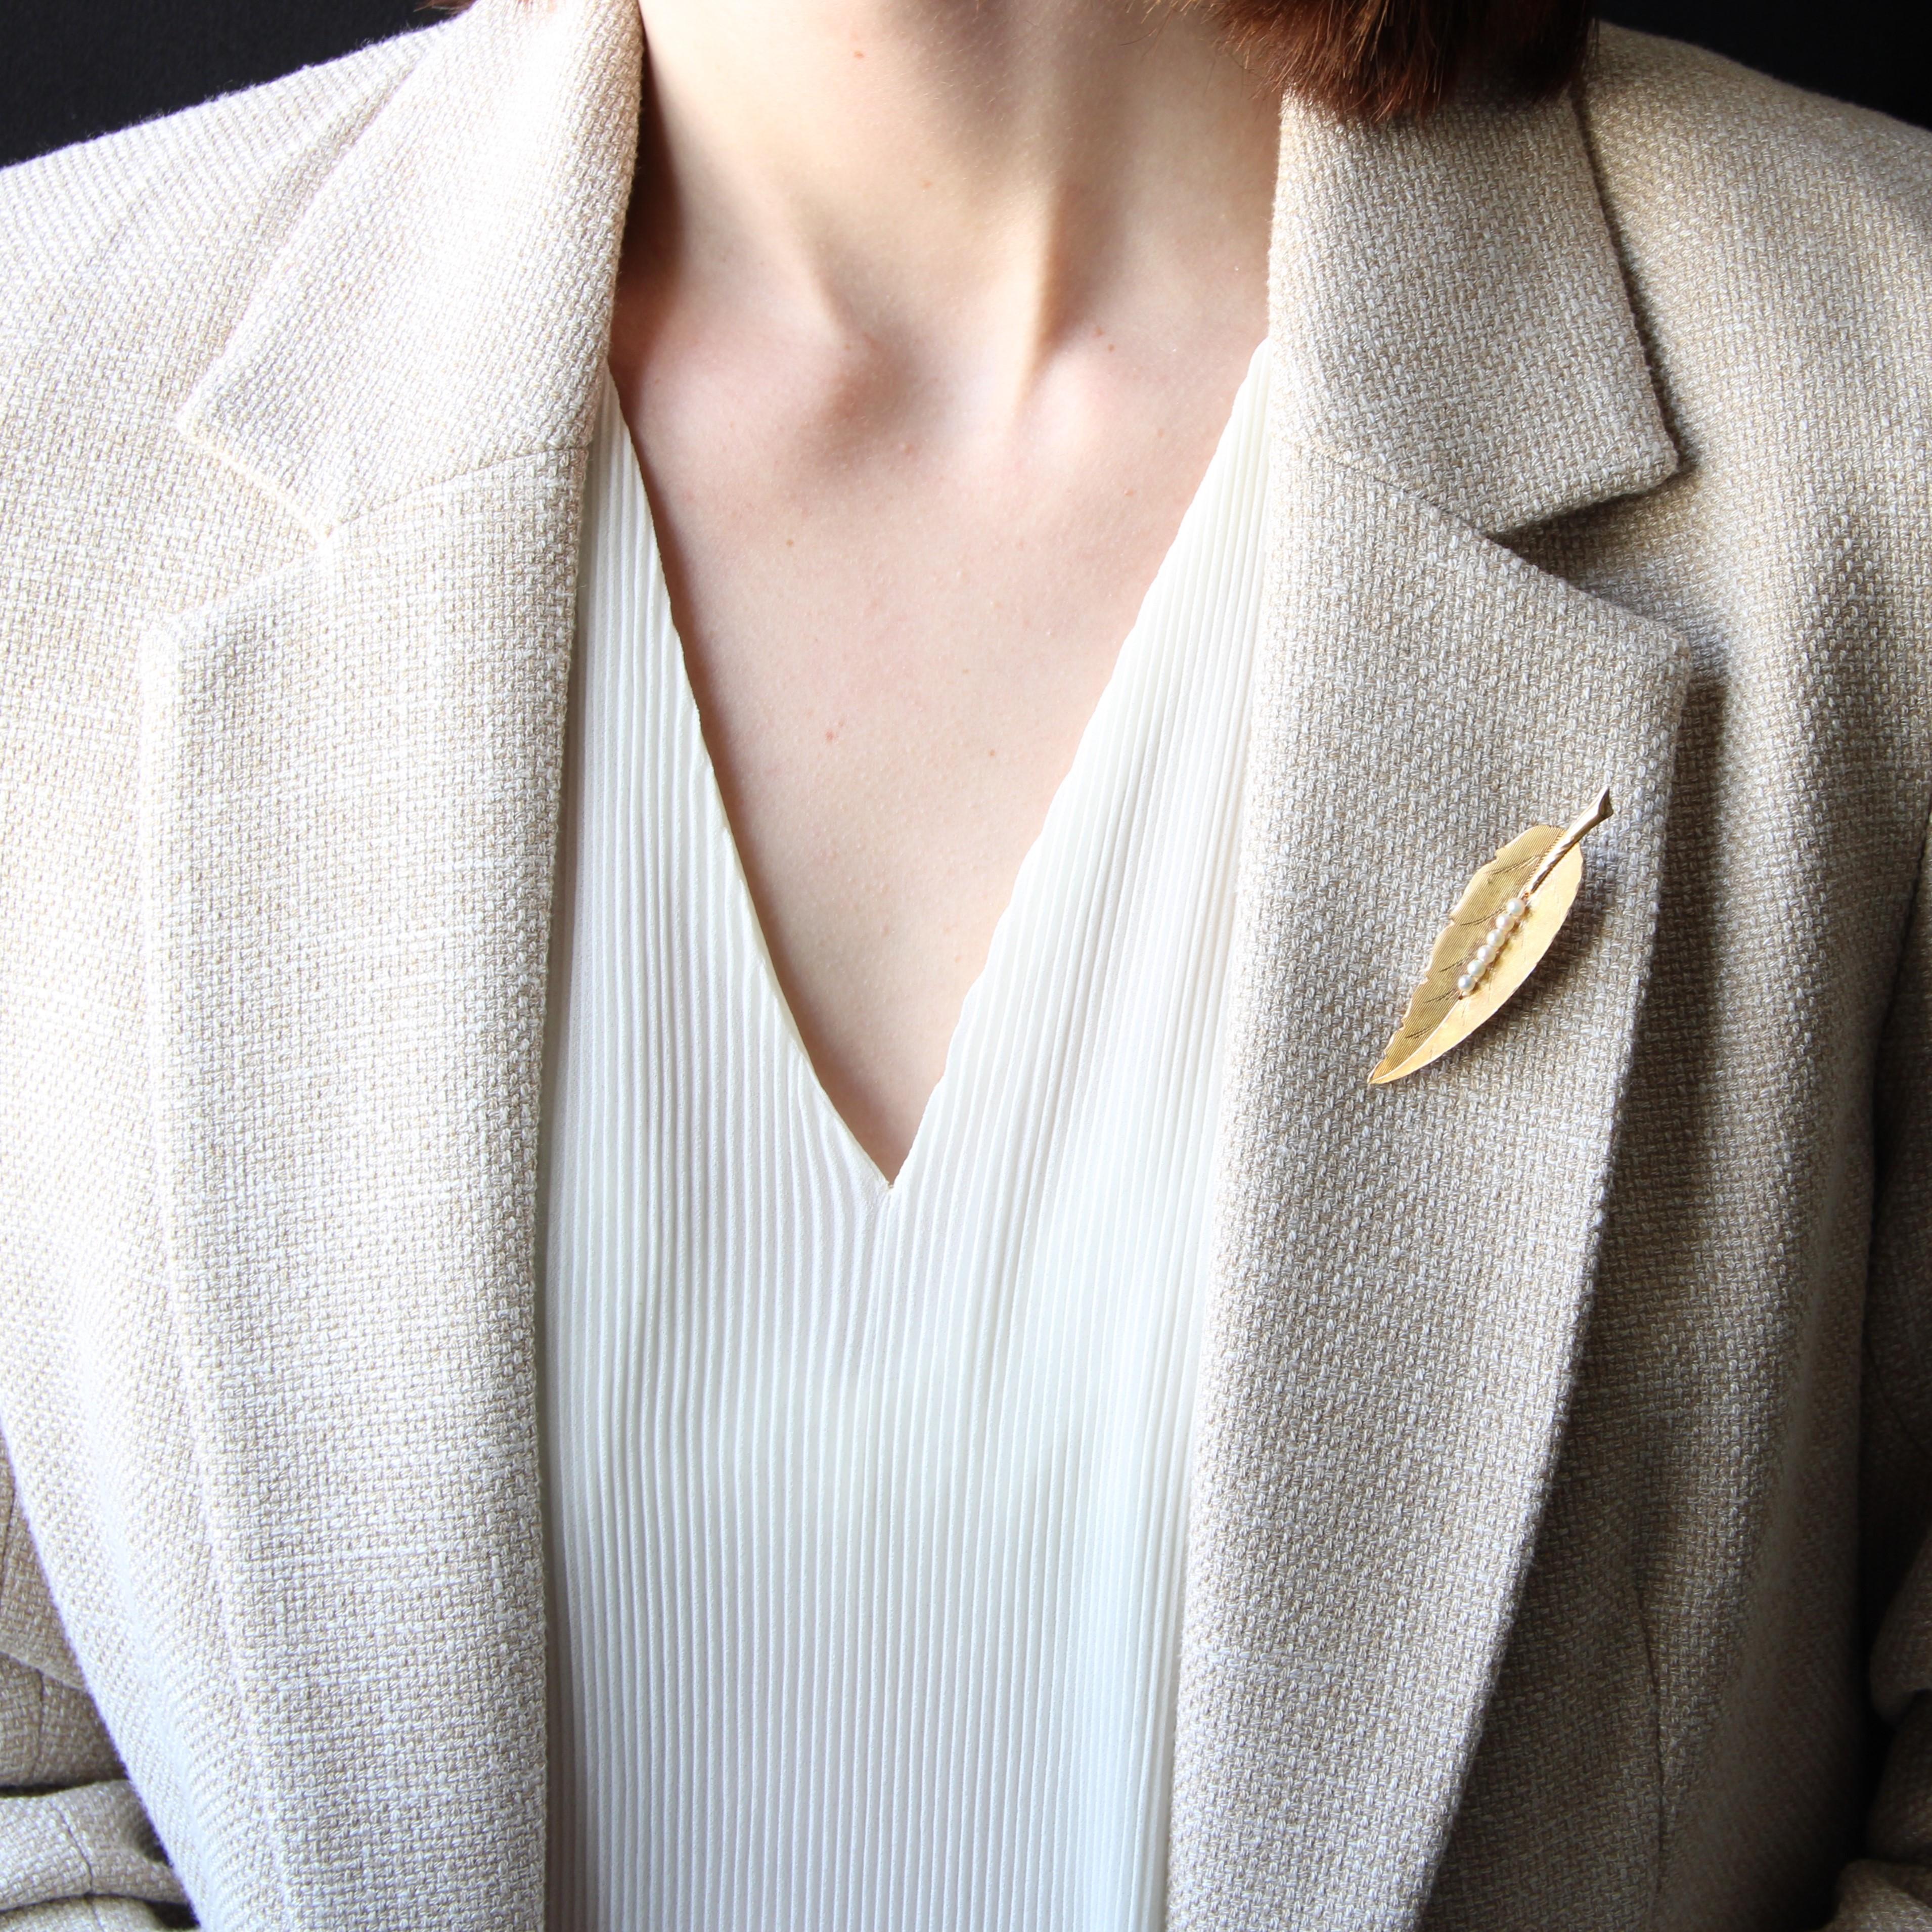 Brooch in 18 karat yellow gold.
Antique gold brooch, it represents a stylized feather of different finishes of material : brushed, chiseled, smooth and striated gold, which gives it a lot of realism and relief. The center of this retro brooch is